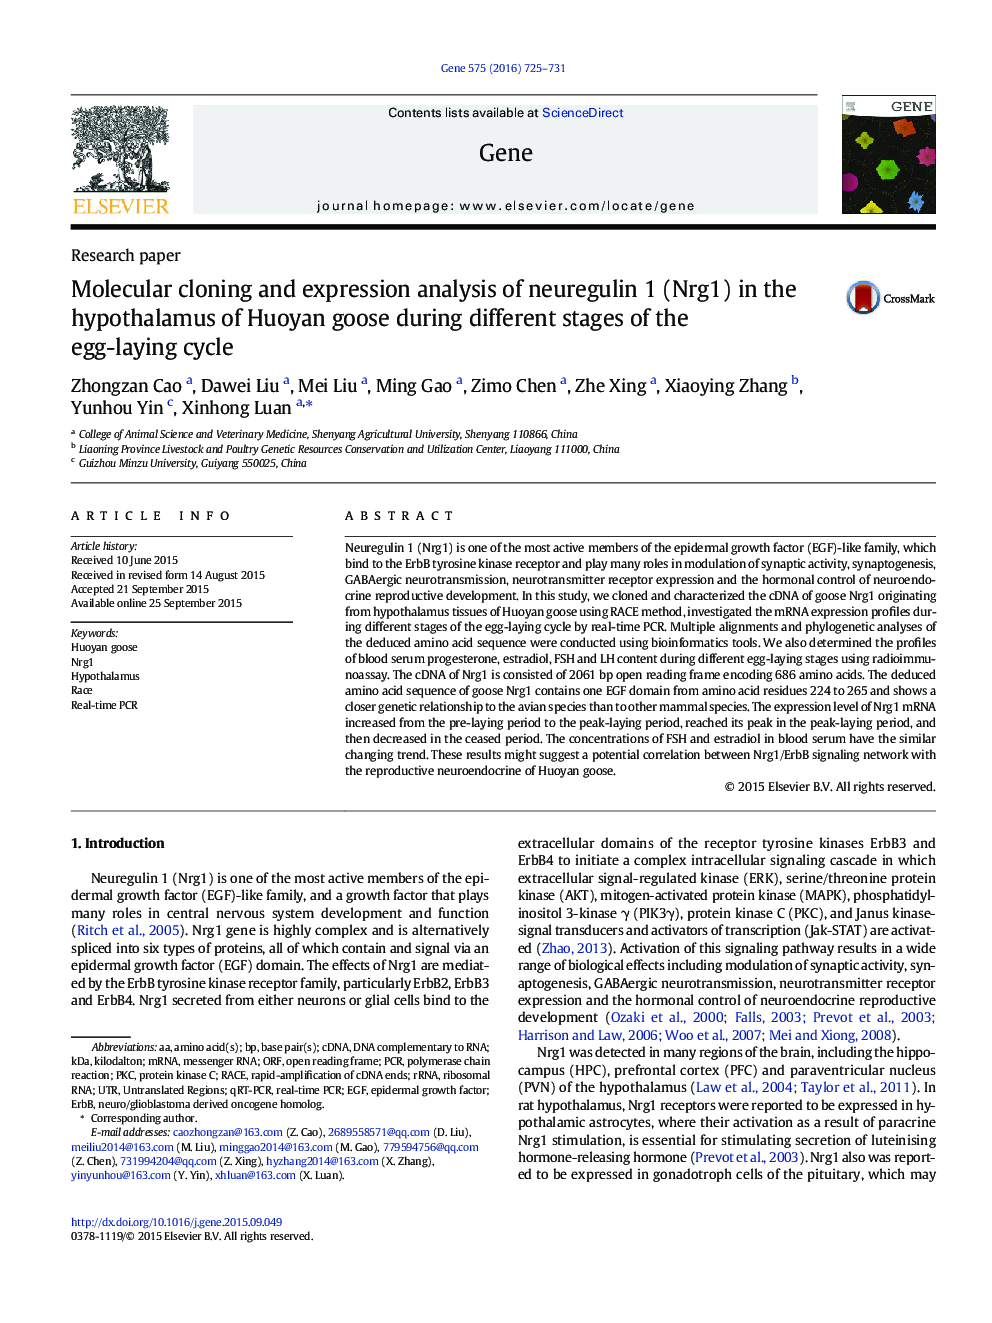 Molecular cloning and expression analysis of neuregulin 1 (Nrg1) in the hypothalamus of Huoyan goose during different stages of the egg-laying cycle